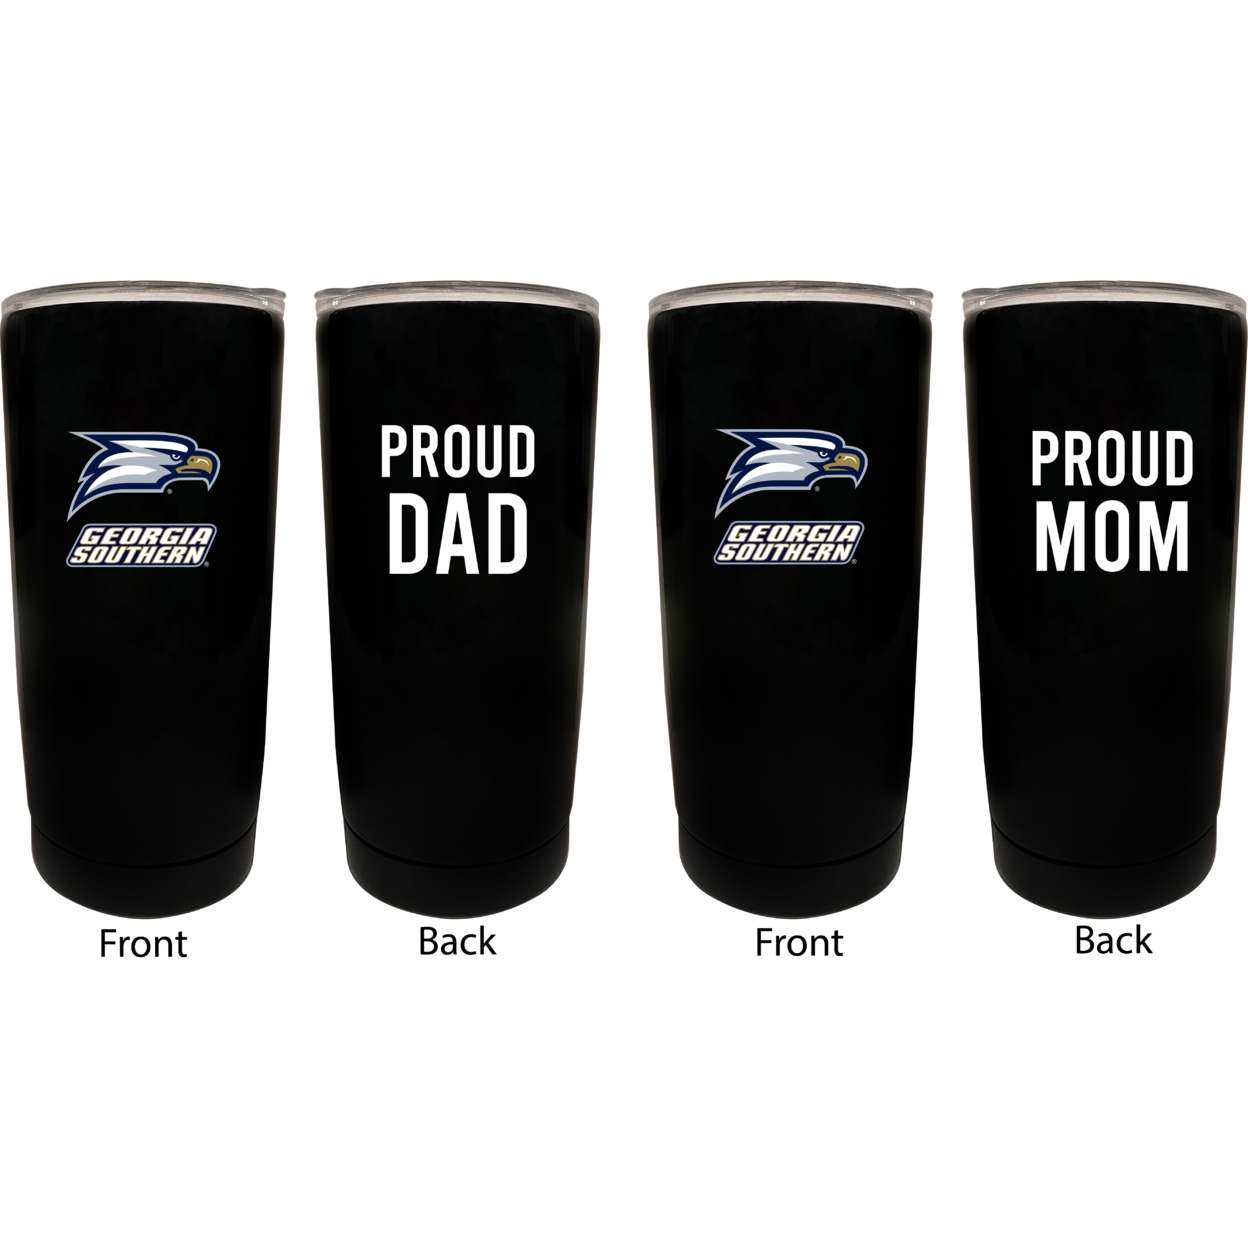 Georgia Southern Eagles Proud Mom And Dad 16 Oz Insulated Stainless Steel Tumblers 2 Pack Black.